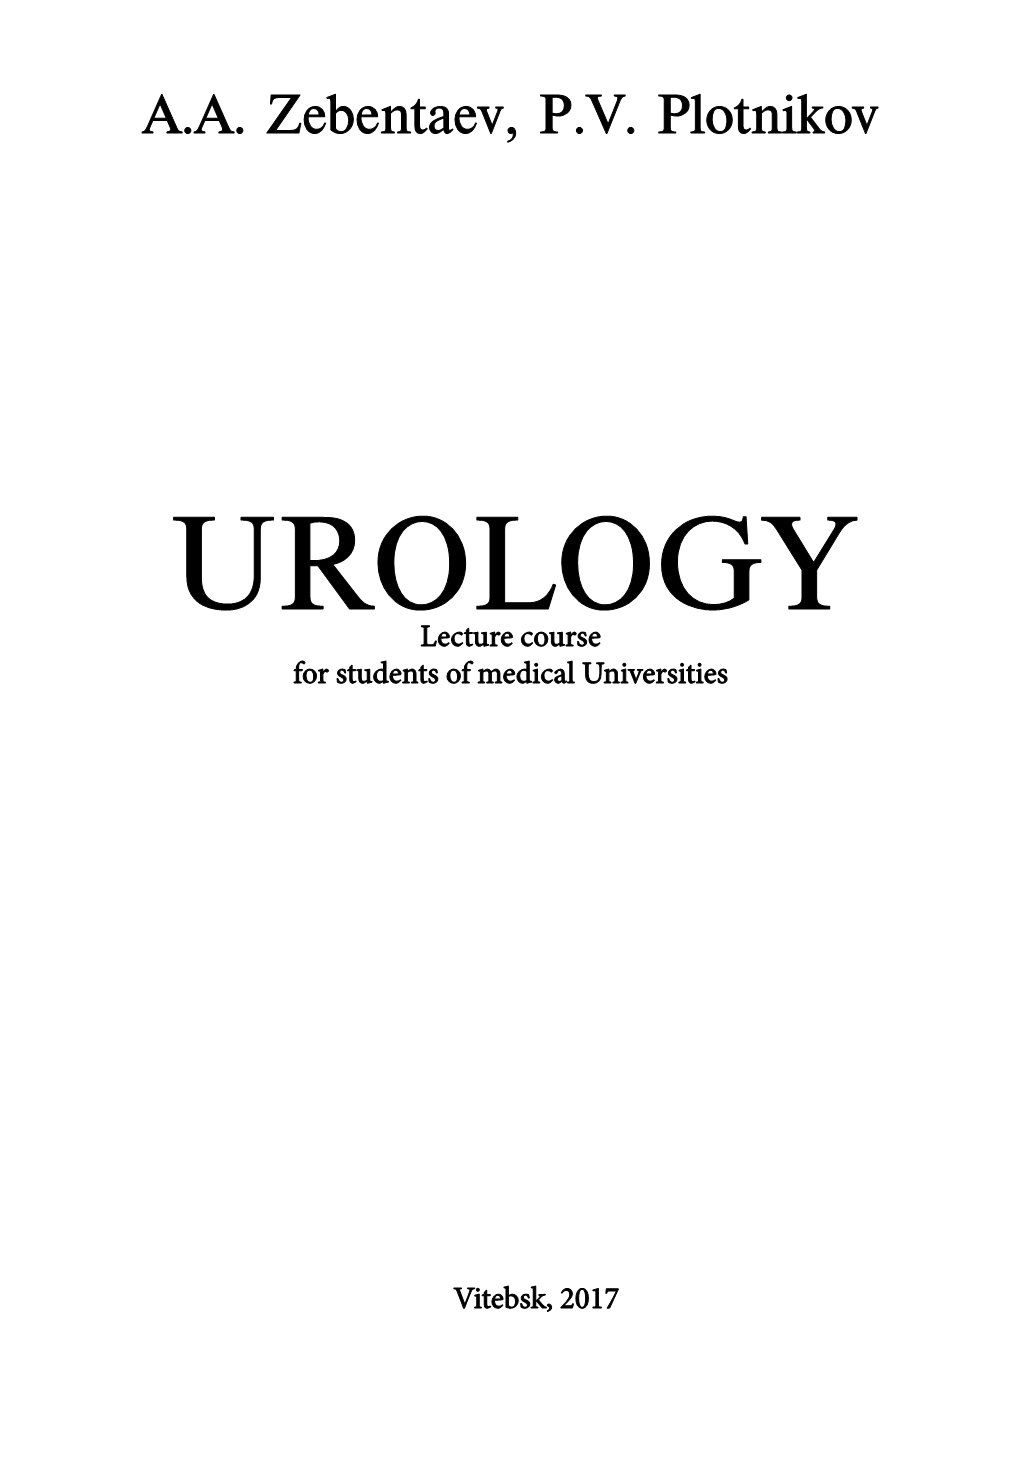 UROLOGY Lecture Course for Students of Medical Universities